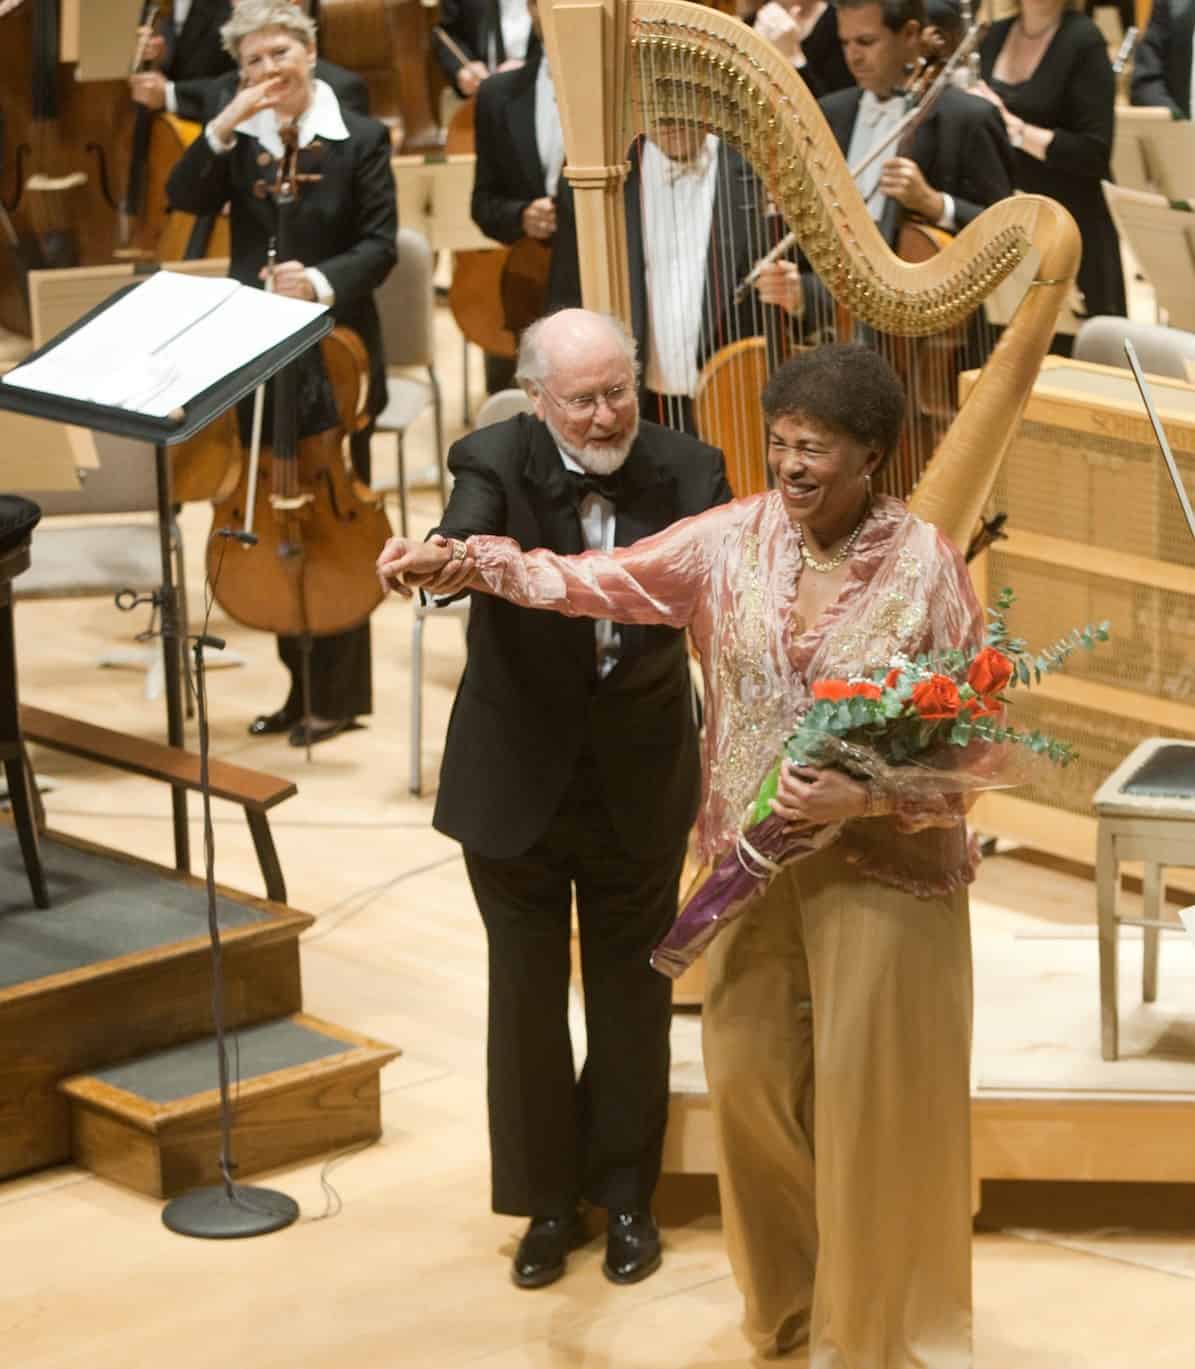 Ann Hobson Pilot holds a bouquet and stands beside John Williams with the Boston Symphony Orchestra. Press photo courtesy of the BSO